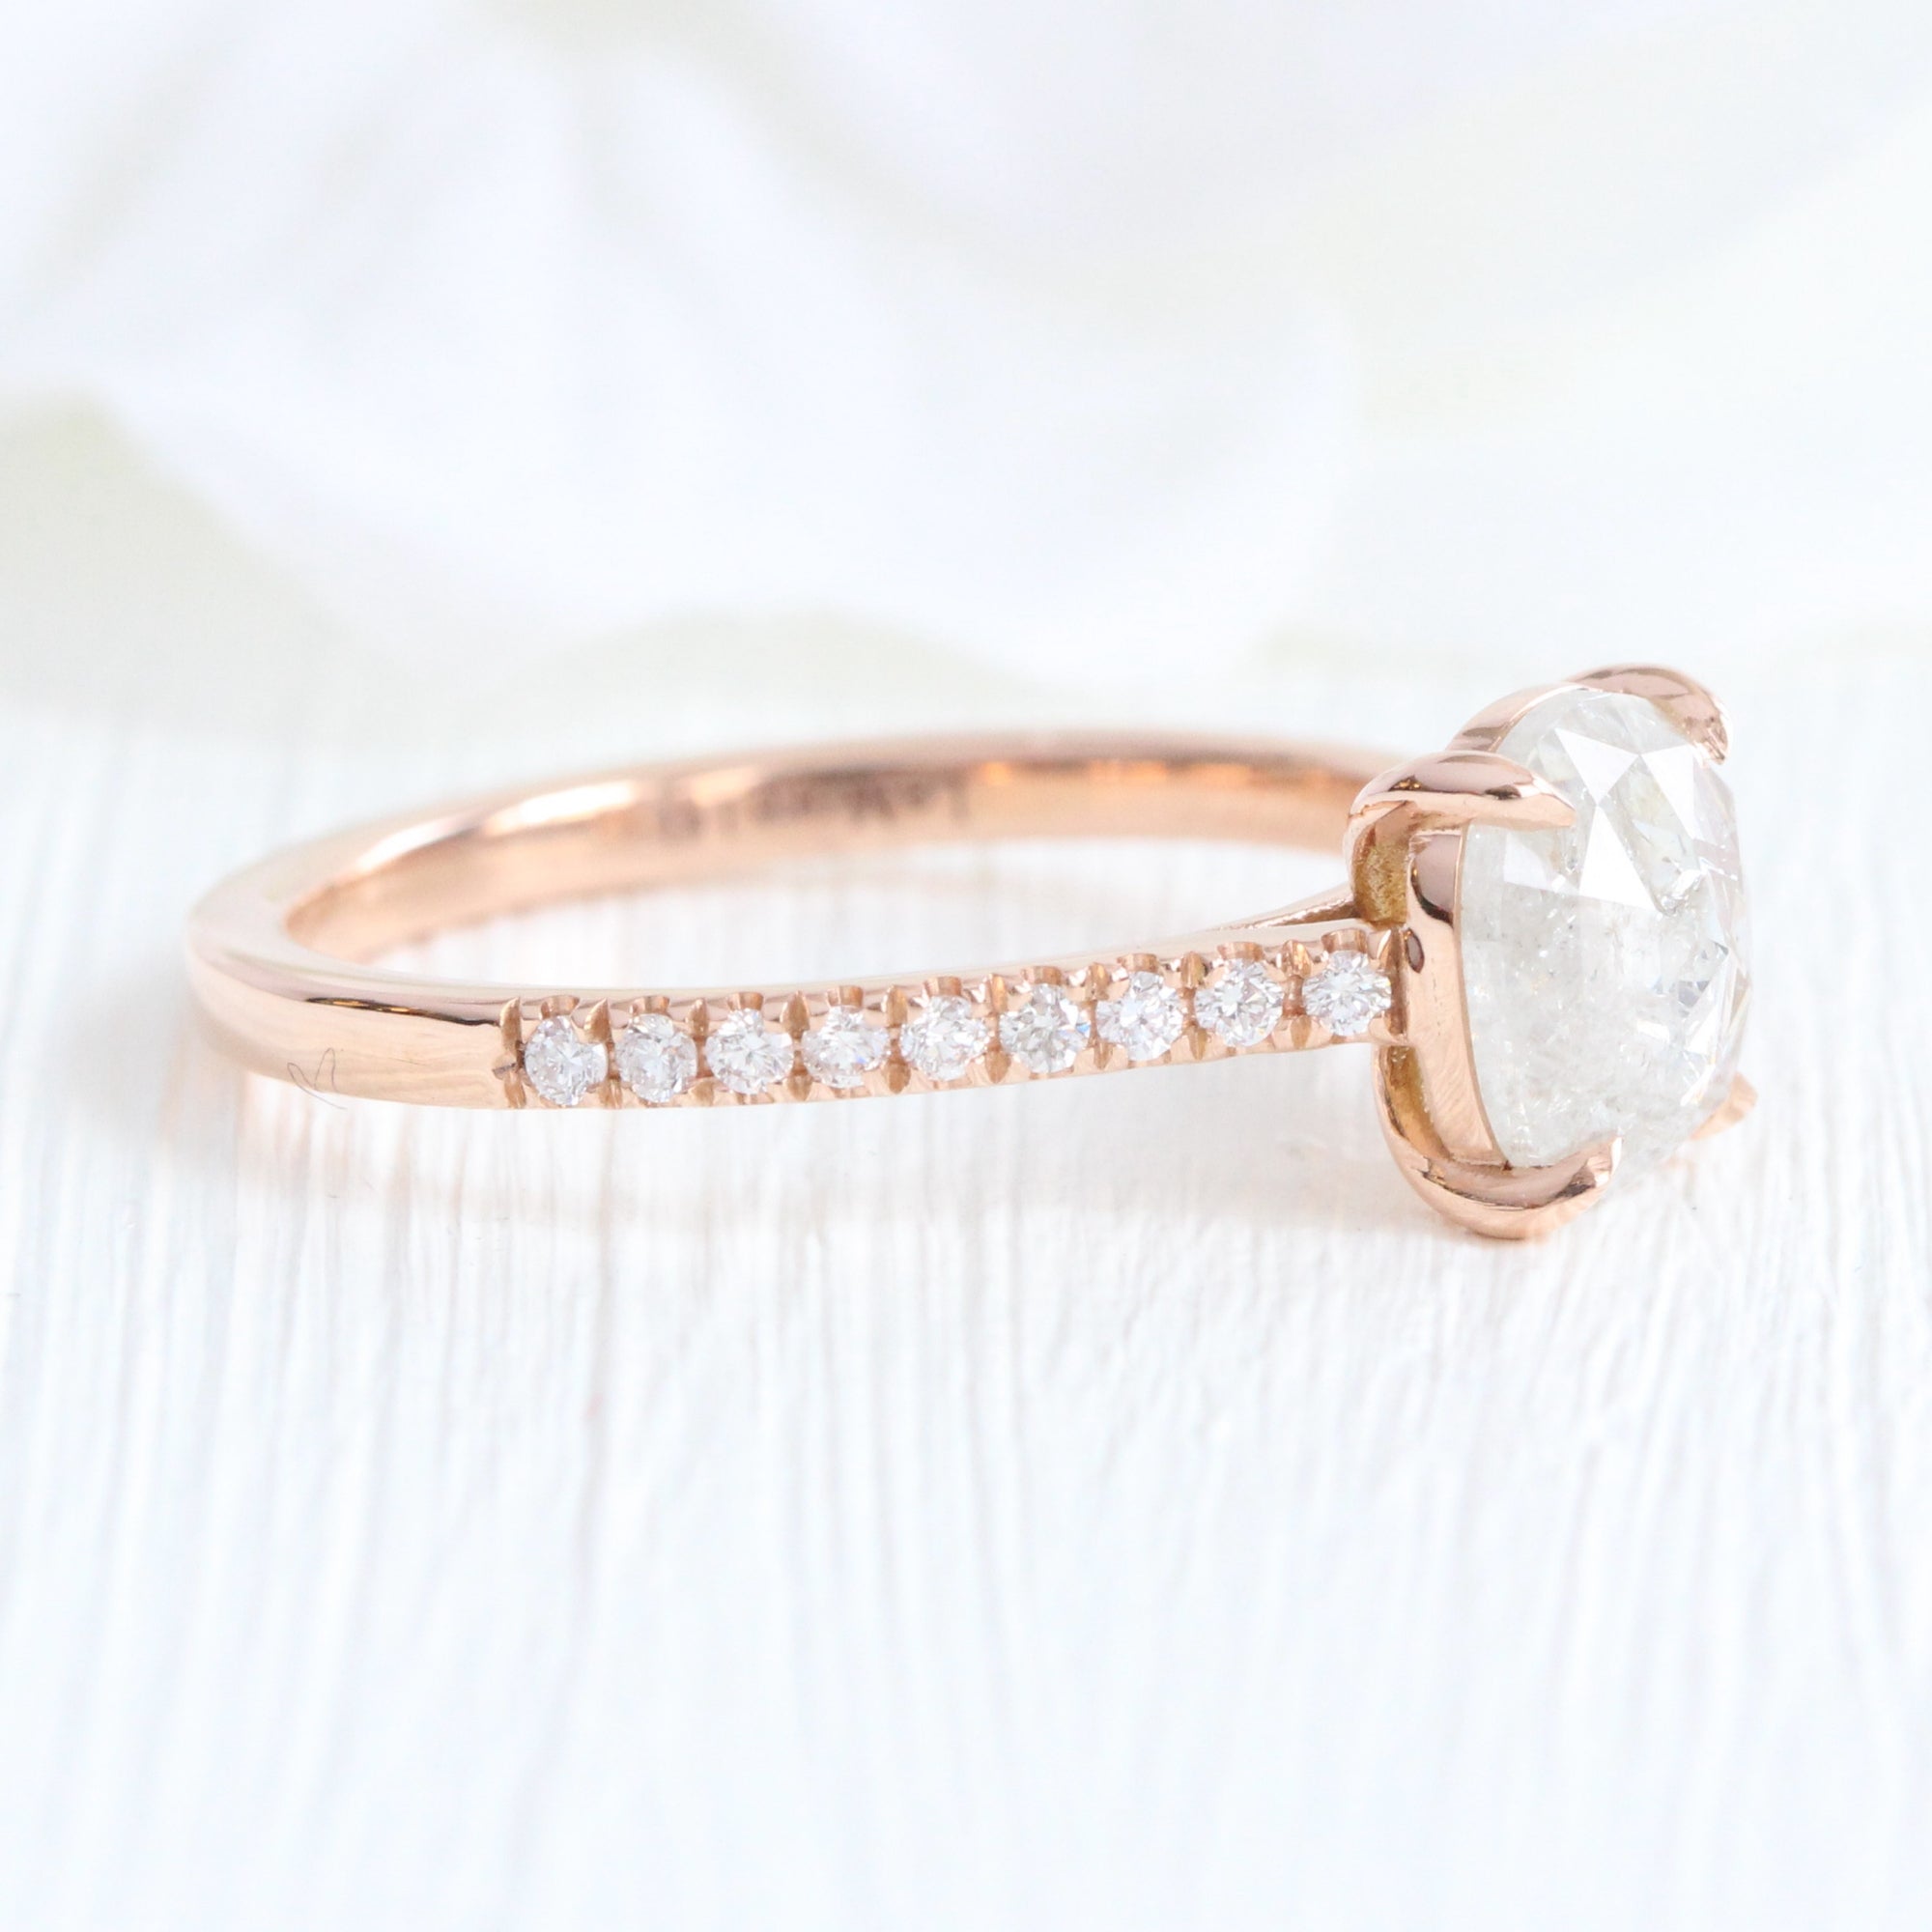 Rose cut cushion salt and pepper diamond ring rose gold solitaire grey diamond pave band la more design jewelry